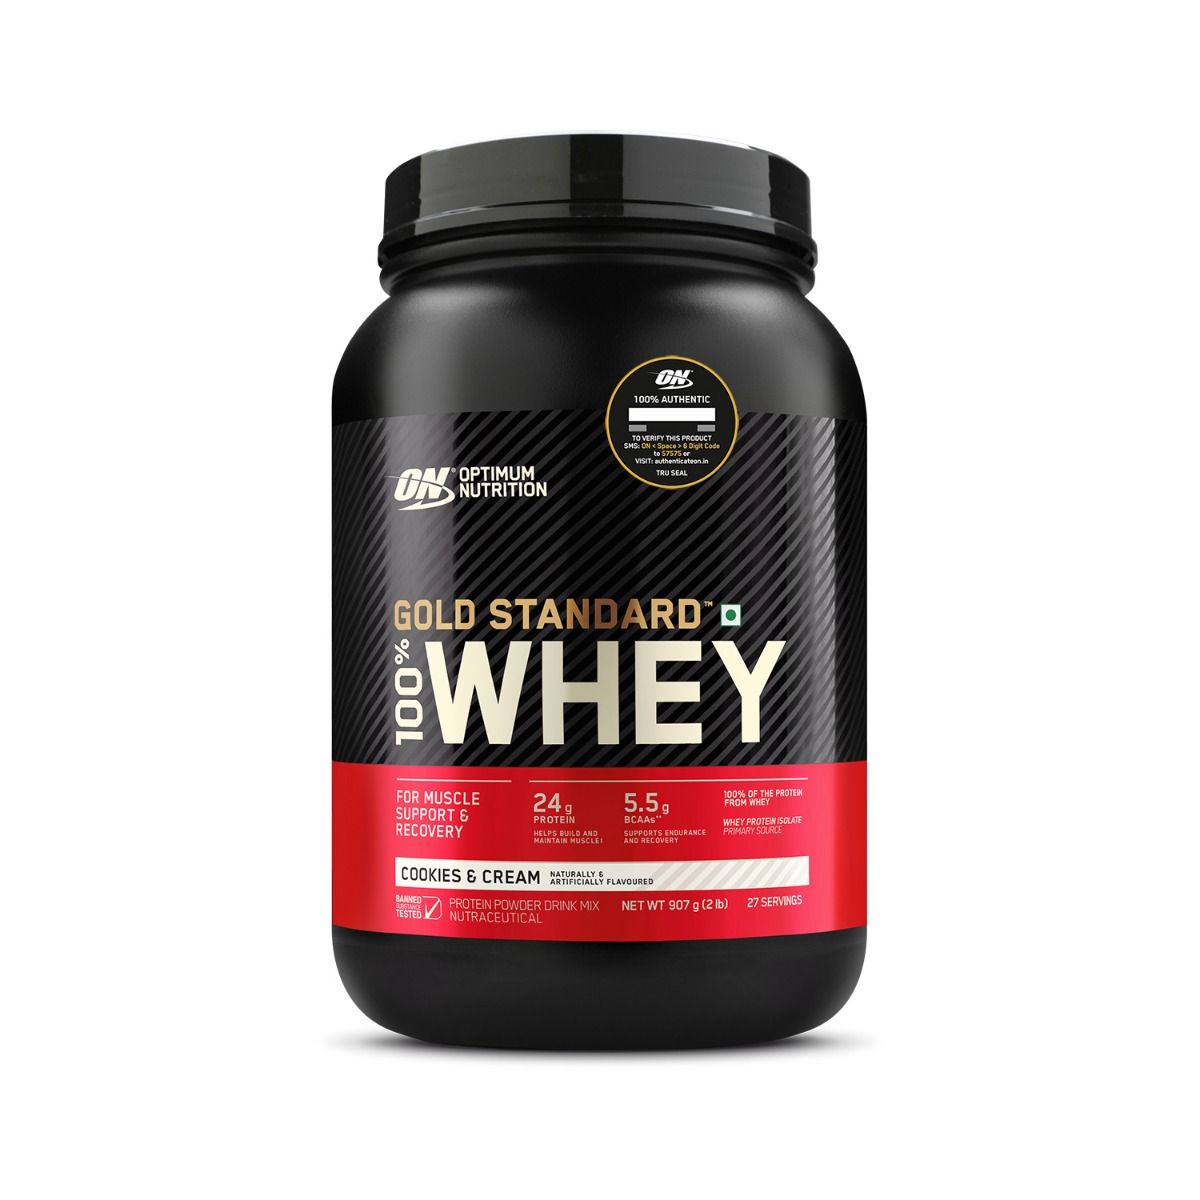 Optimum Nutrition (ON) Gold Standard 100% Whey Protein Cookies & Cream Flavour Powder, 2 lb, Pack of 1 